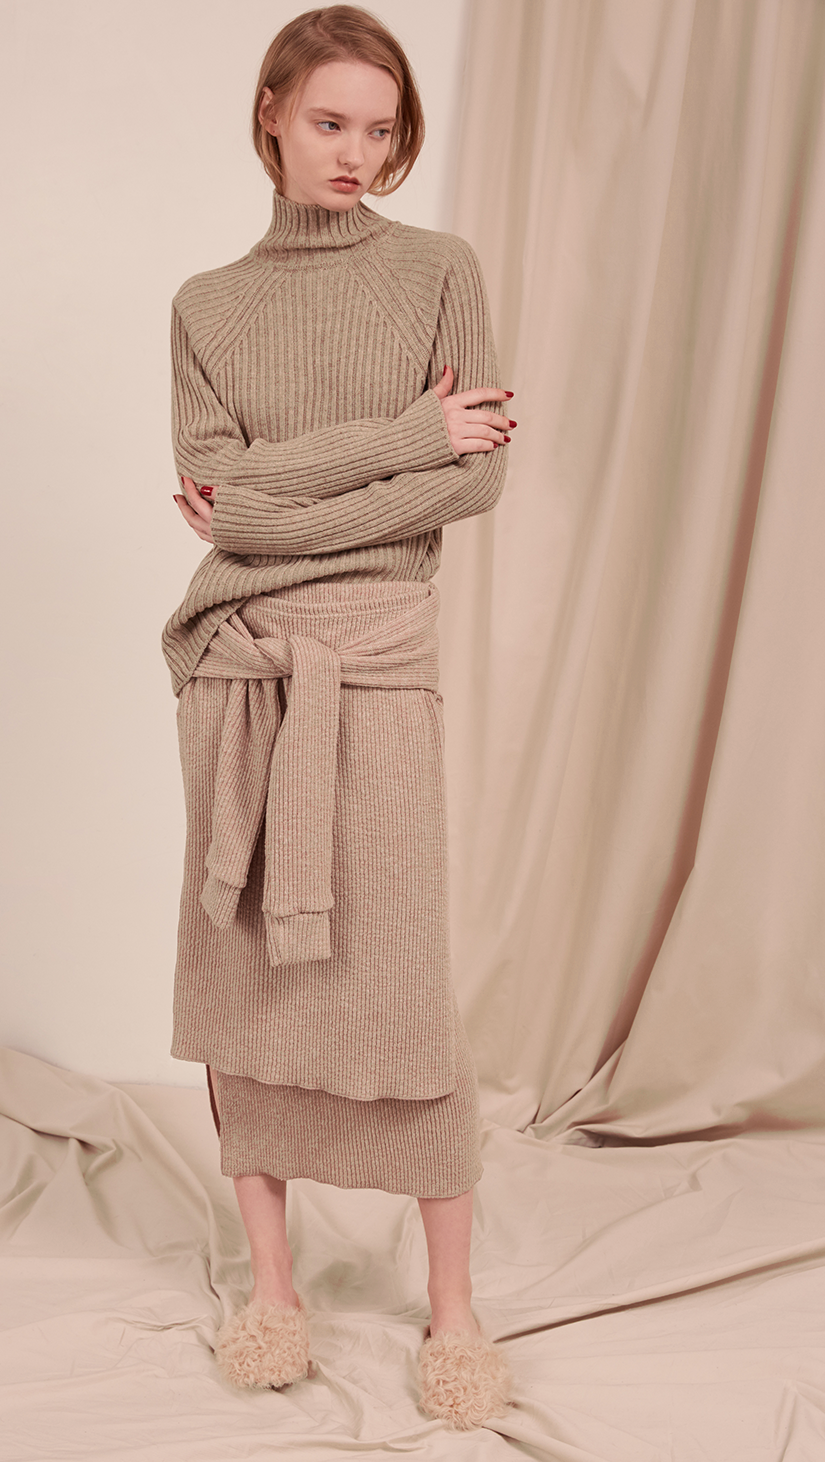 The Natalie Skirt in oatmeal beige. With double layer in ribbed knit, self wrap tie, gathered elastic waistband, deep side slits. Pull on.